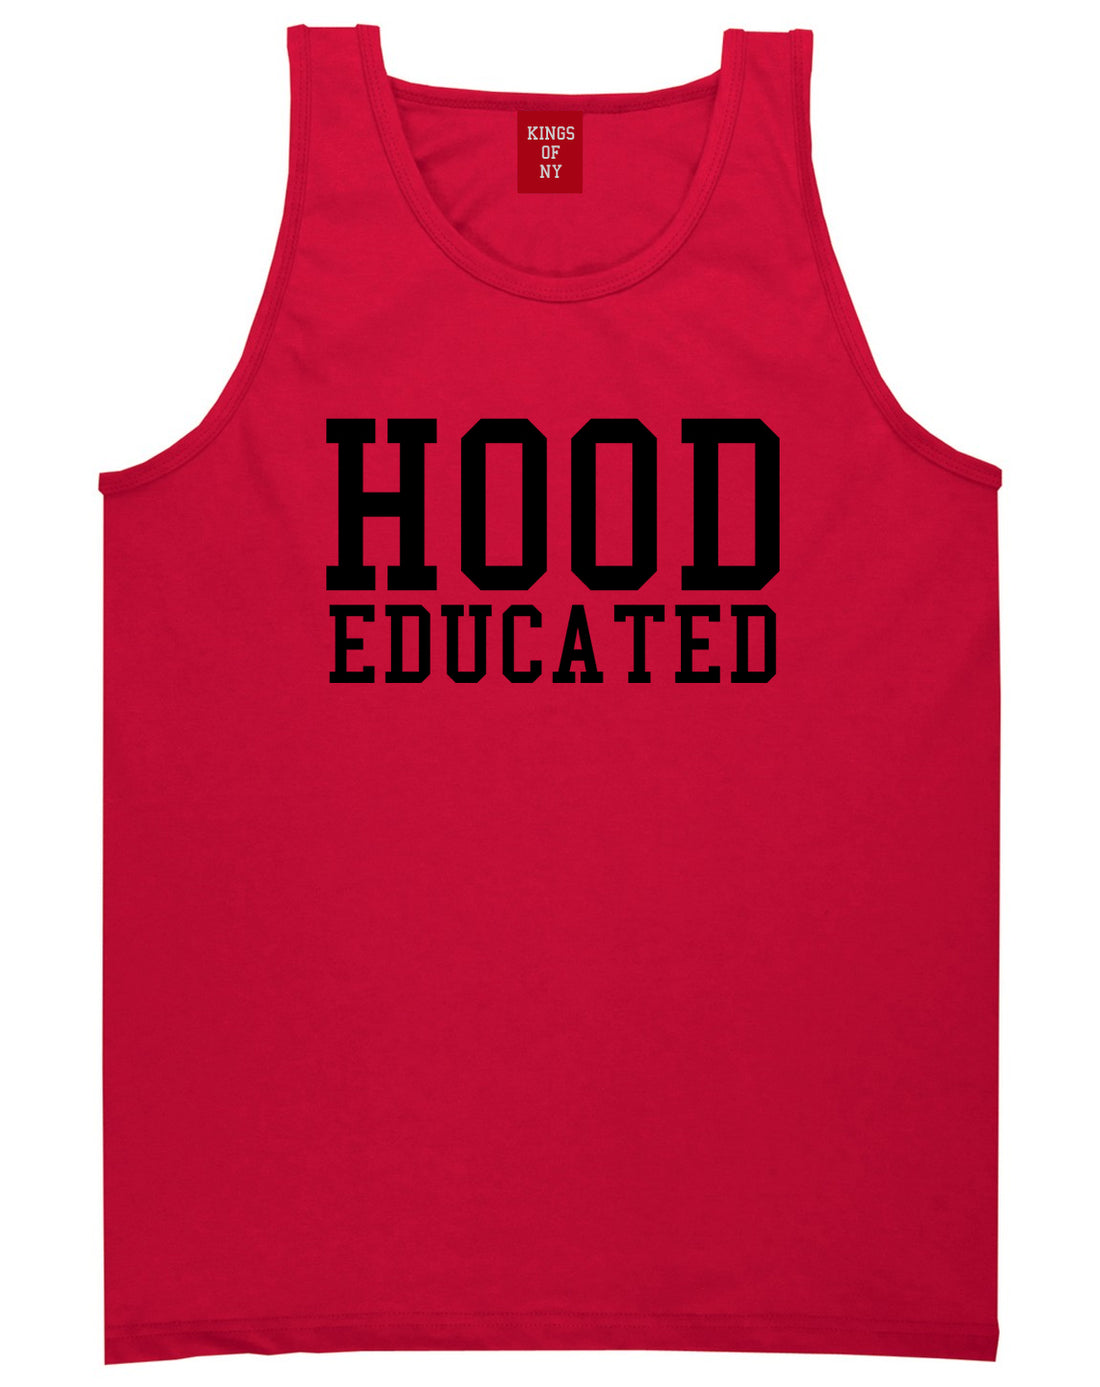 Hood Educated Funny College Mens Tank Top T-Shirt Red